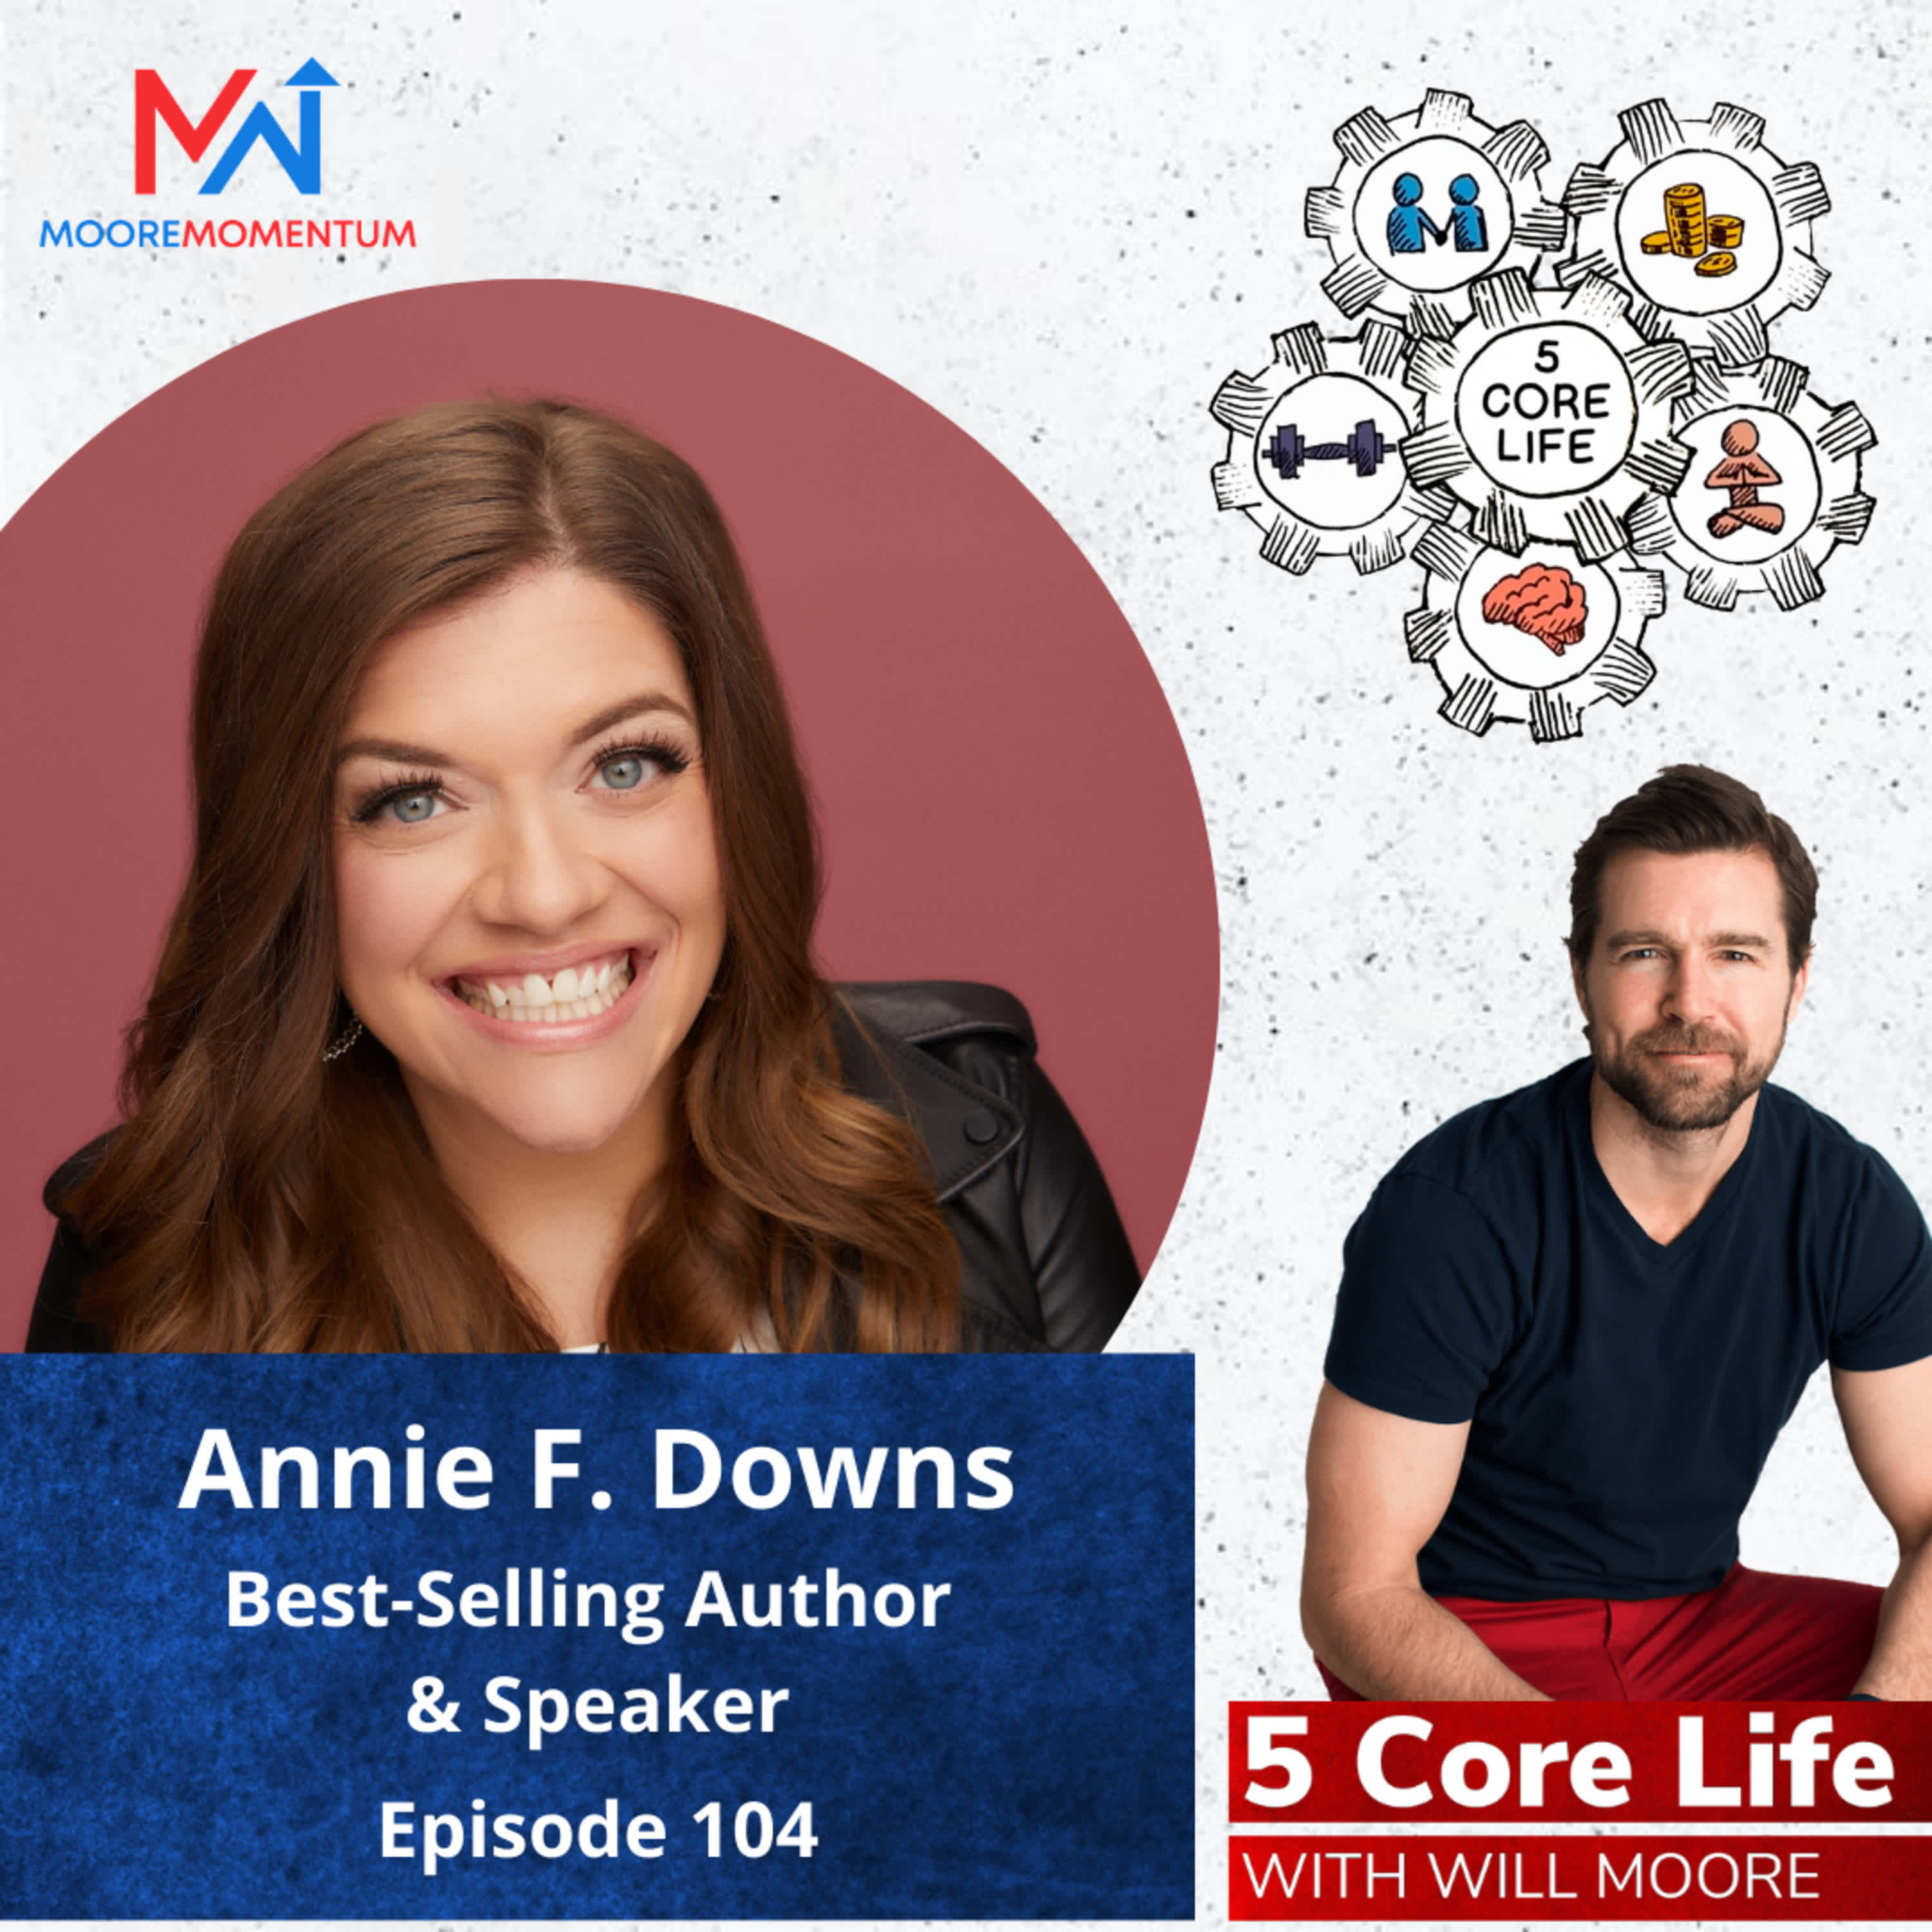 How to Improve Your Life Quality with Annie F. Downs, NYT Bestselling Author